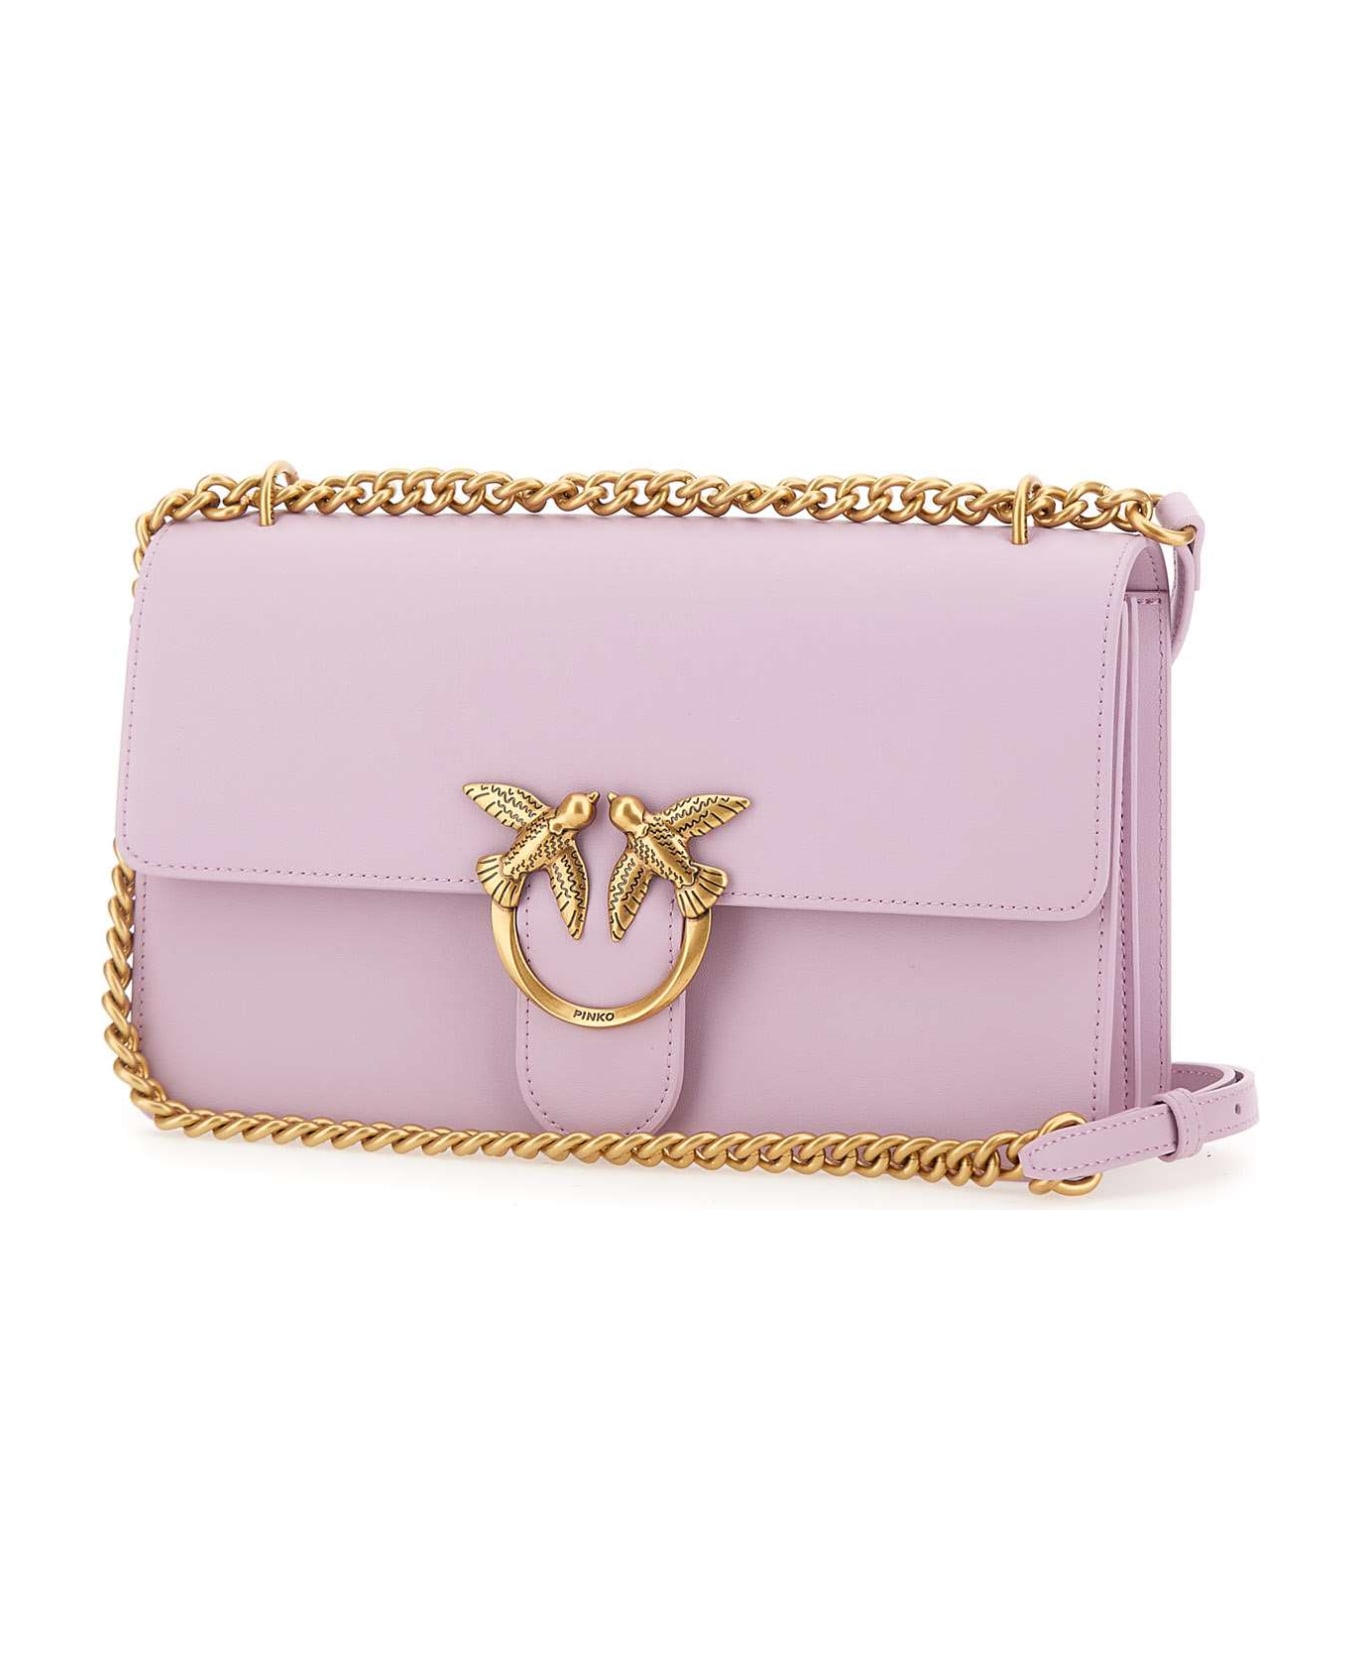 Pinko 'love One Classic' Leather Bag - LILAC